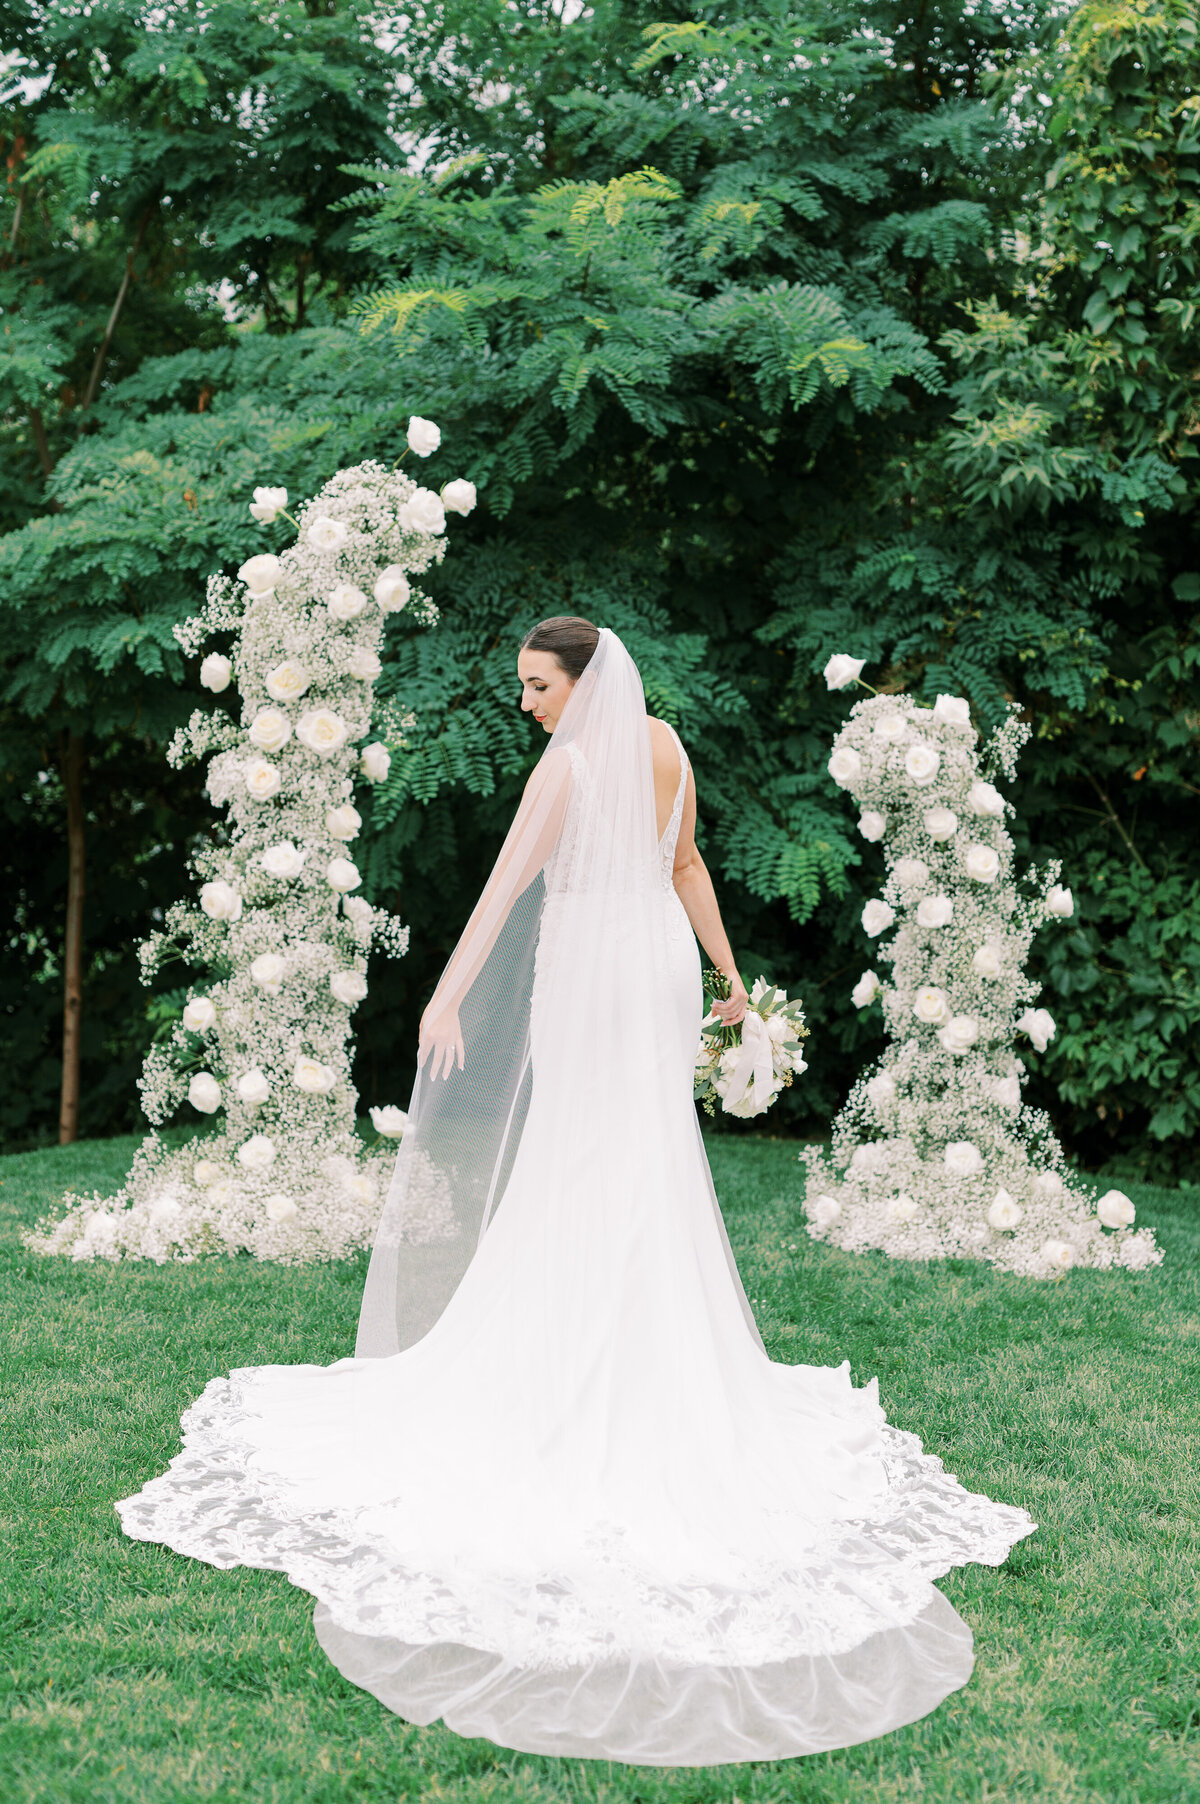 Bride standing in front of floral arch in gown